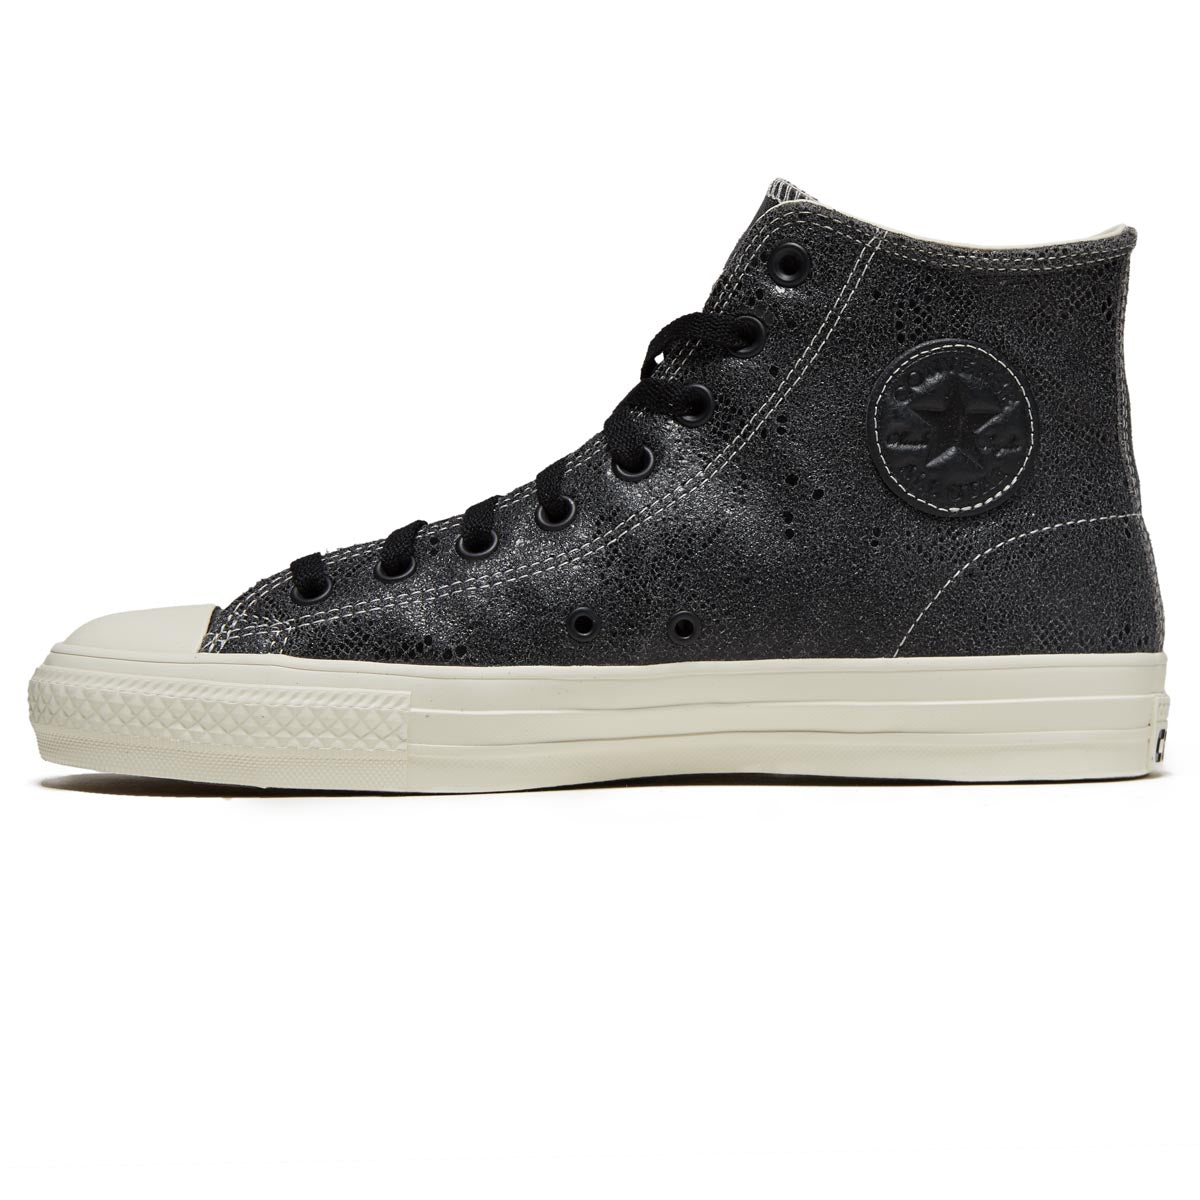 Converse Chuck Taylor All Star Pro Snake Suede Hi Shoes - Black/Dolphin/Egret image 2